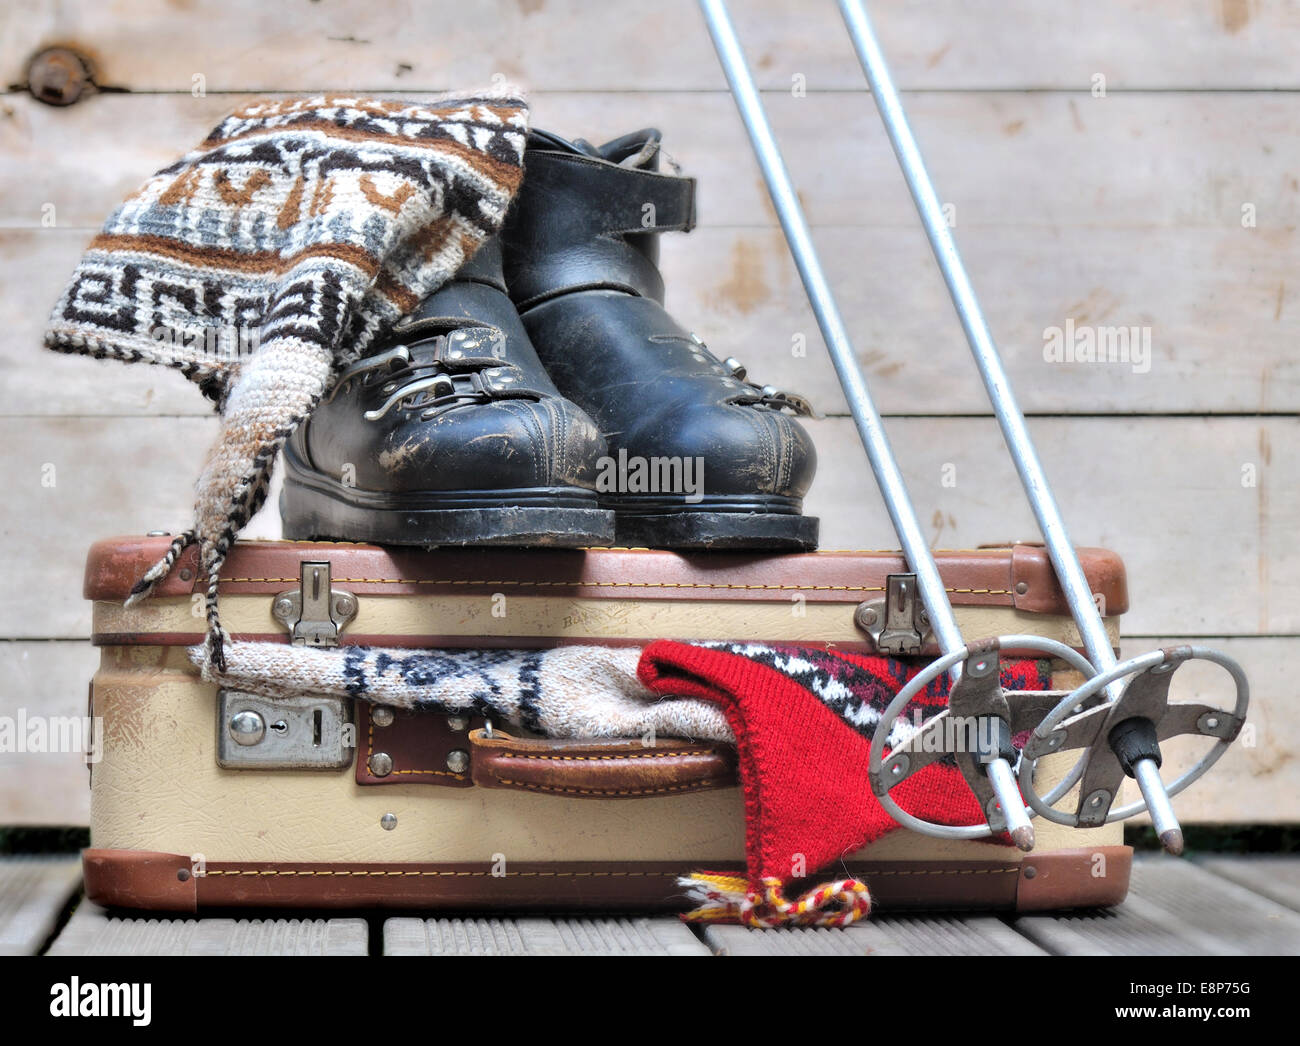 old ski boots on a small  suitcase full of warm clothes Stock Photo